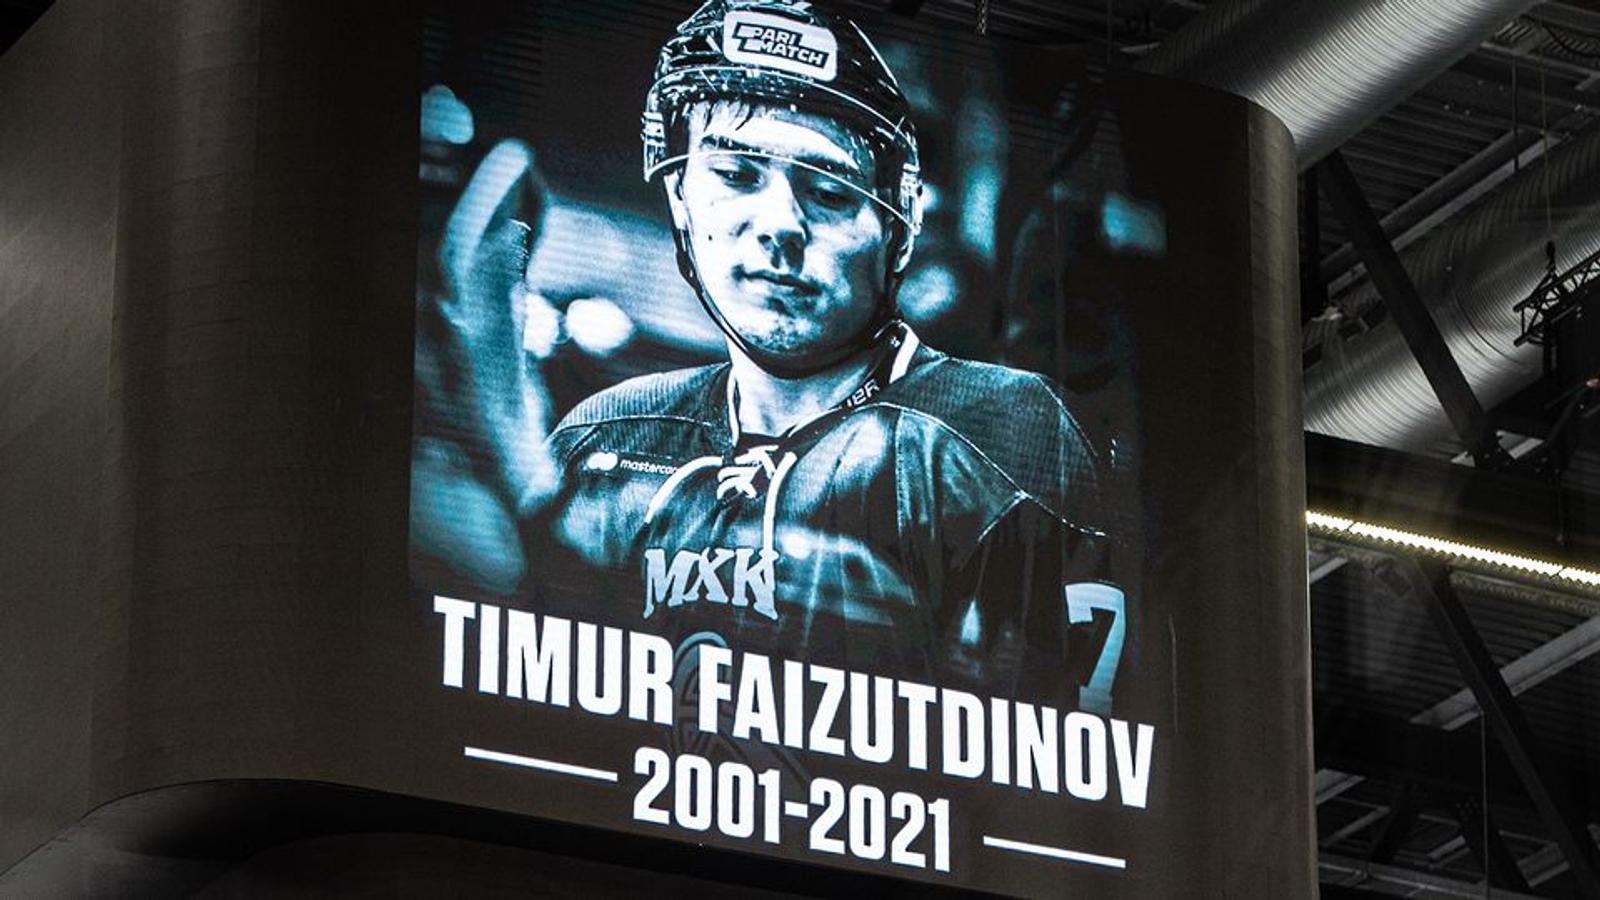 The KHL releases heartbreaking video in memory of Timur Faizutdinov